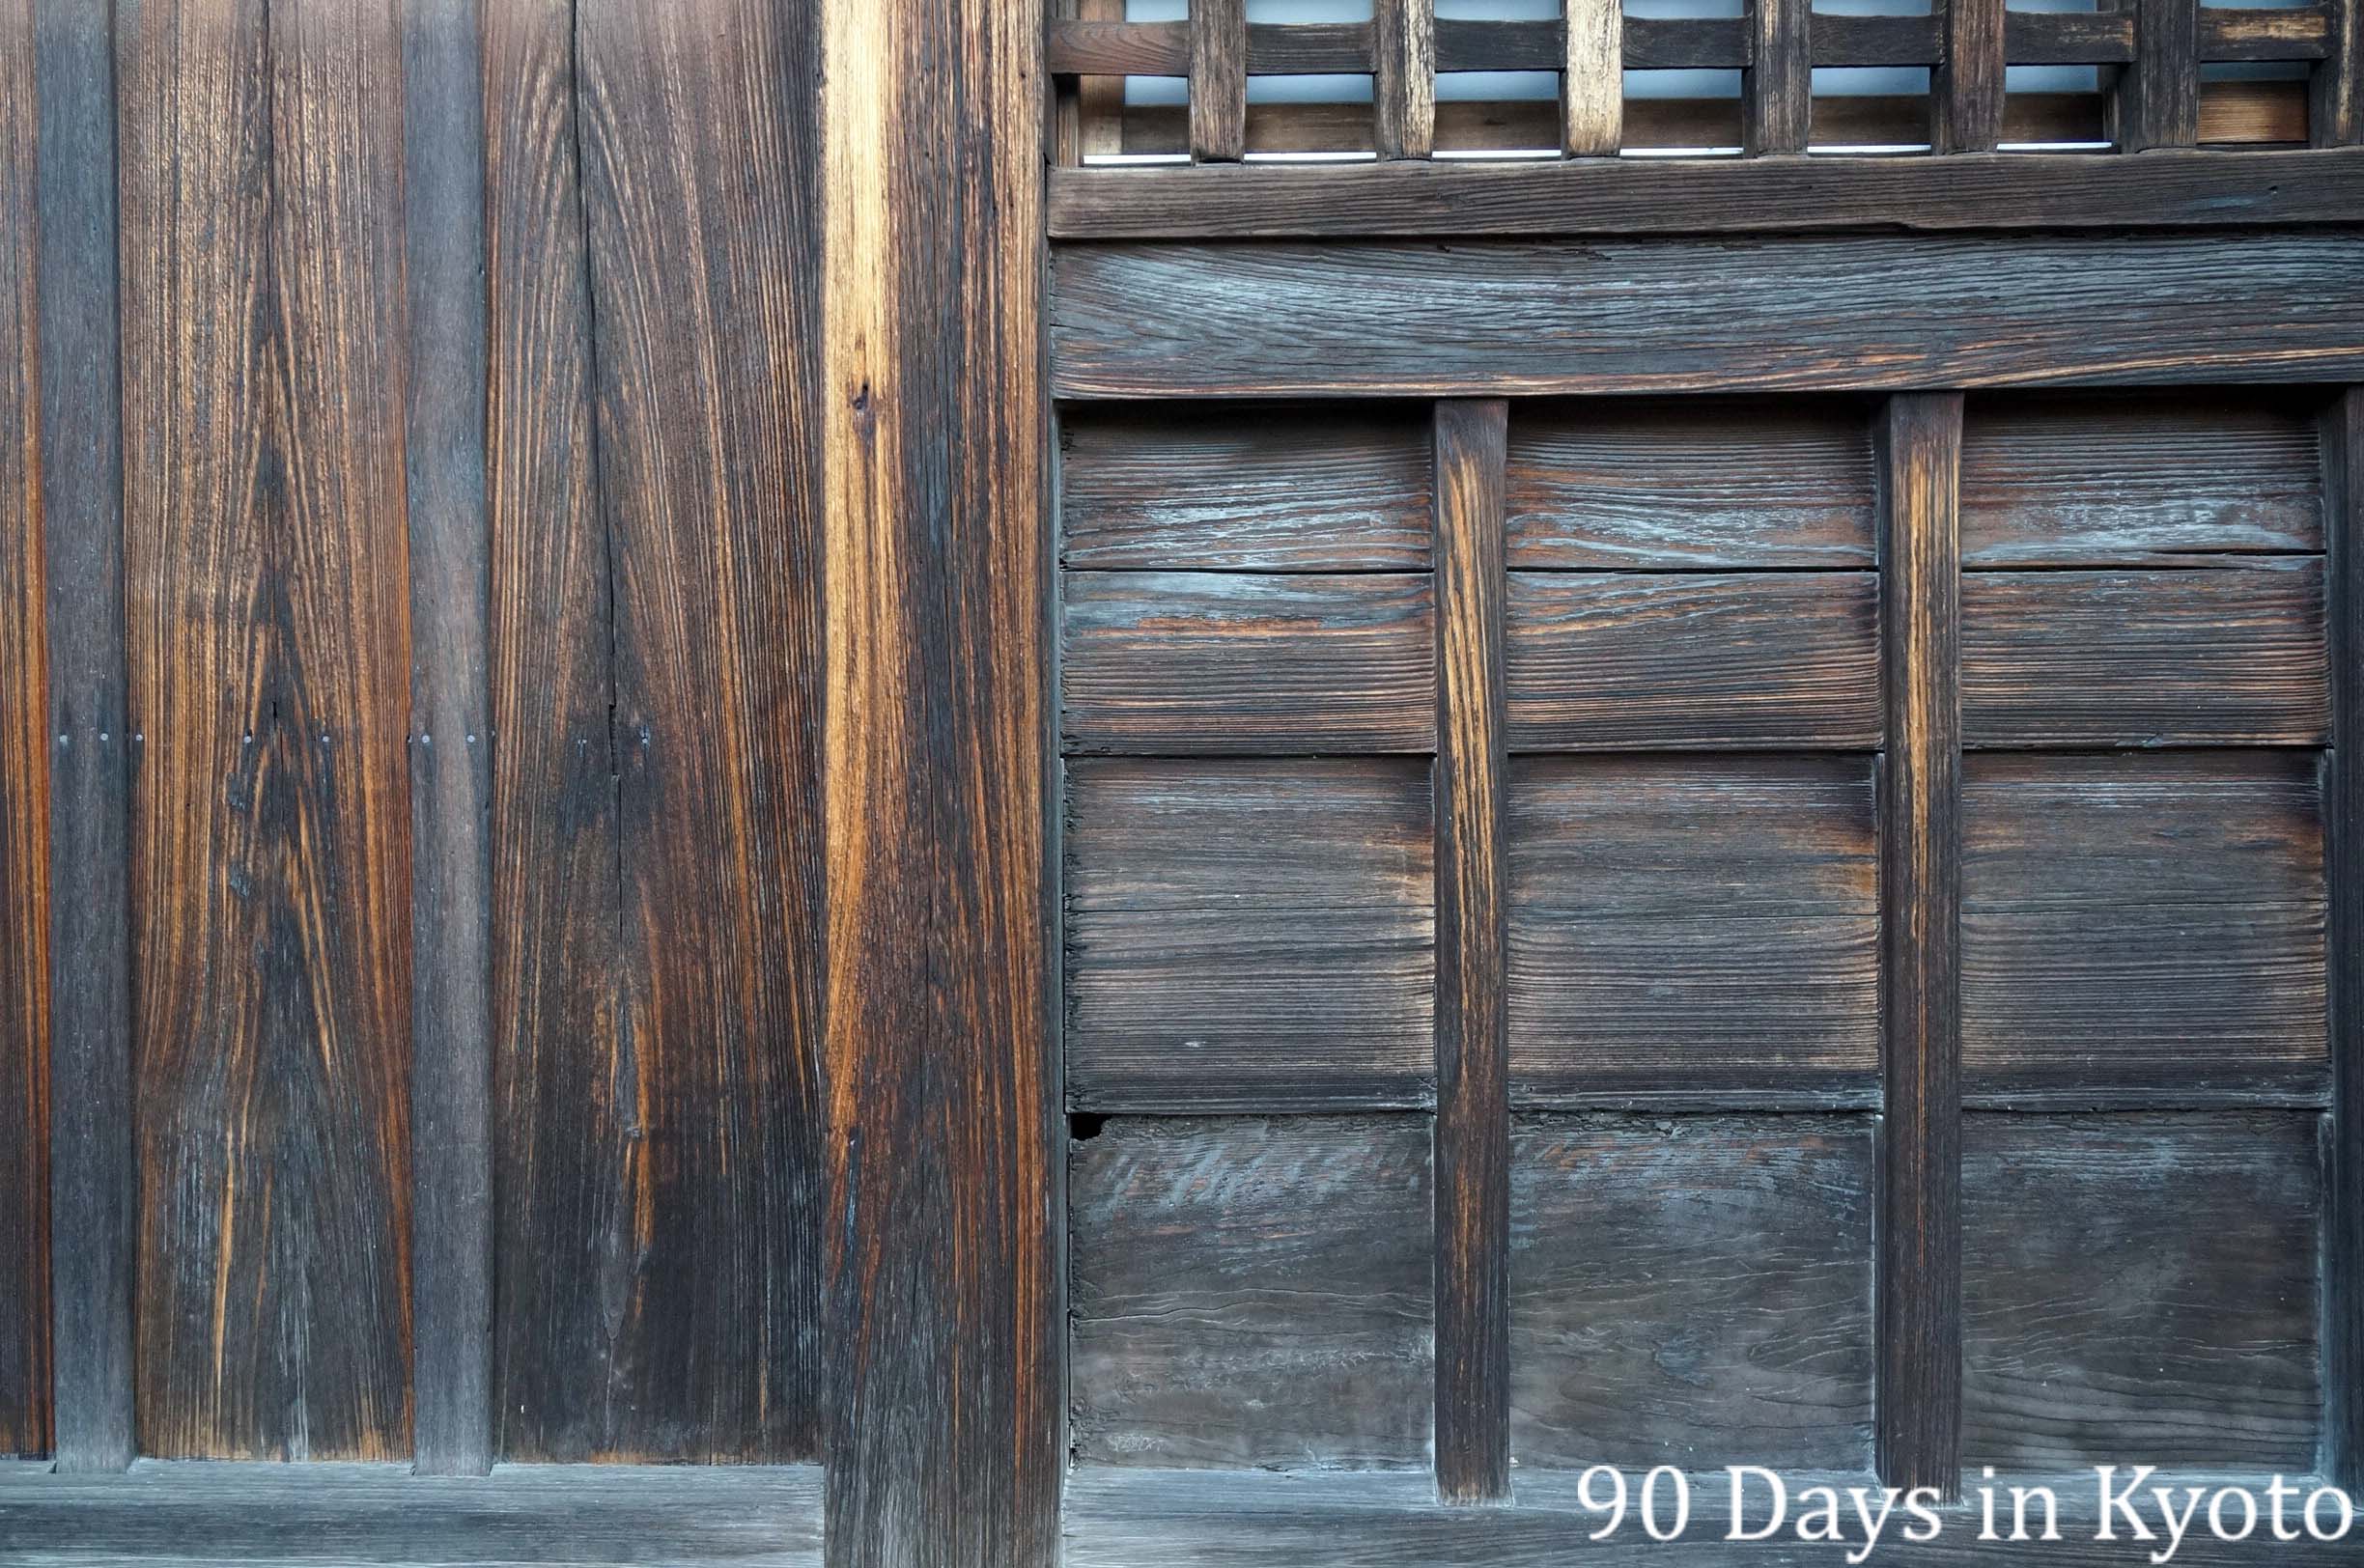 Day 1 – Texture – 90 days in Kyoto